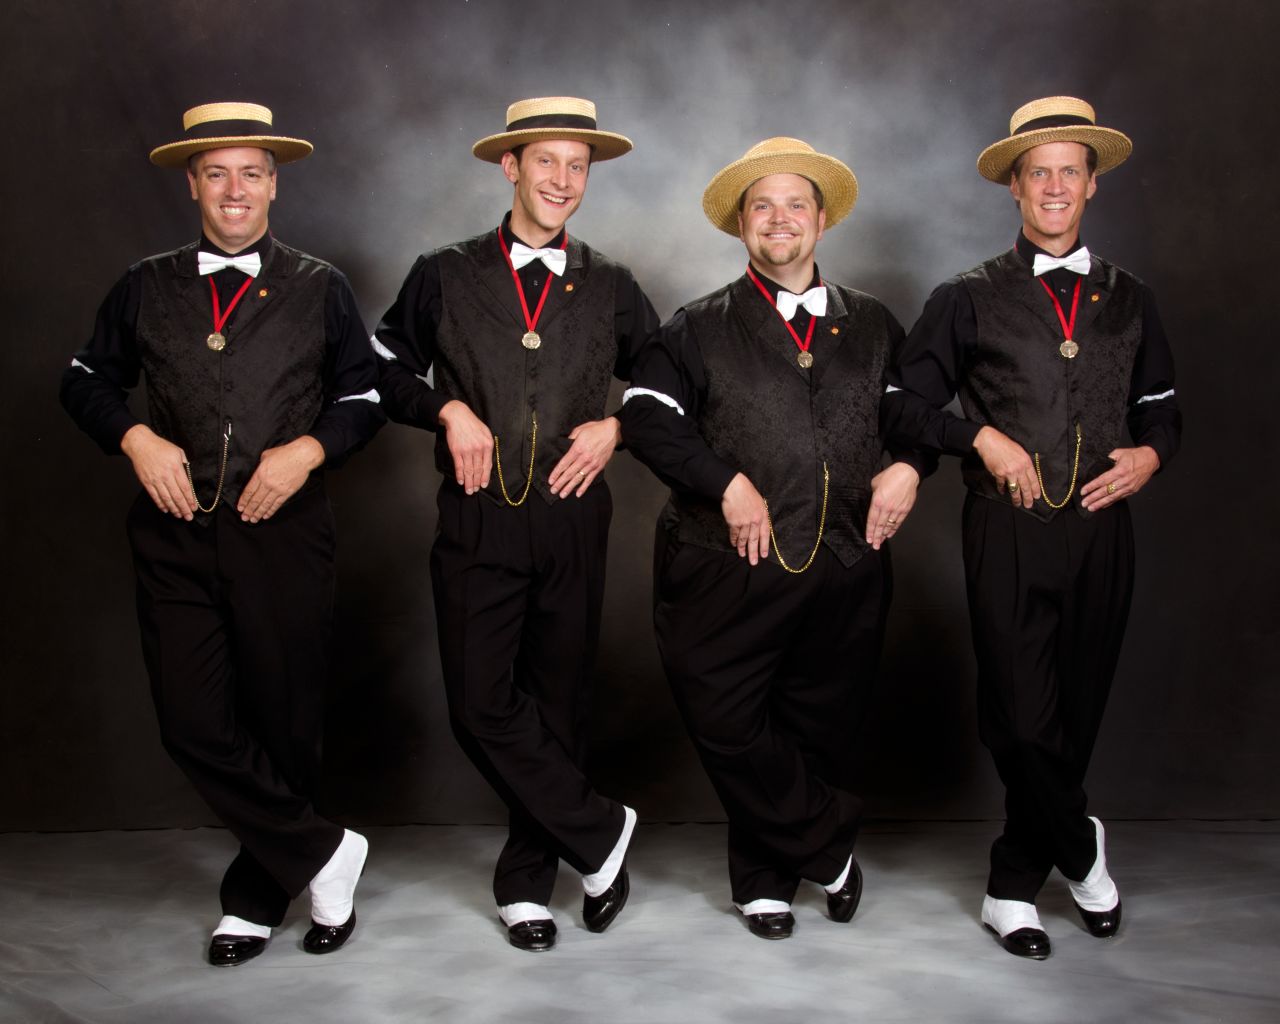 The award-winning Main Street Quartet from Florida made a splash with a medley of not-so-old chestnuts by Britney Spears, Lady Gaga, Bruno Mars and Pink during the 2015 International Barbershop Convention. The video of their performance went viral on YouTube, with more than 700,000 views. Questioning how the music of today will sound to listeners decades from now, the medley was built around a 1963 song by the Osmond Brothers, "These Will be the Good Old Days."   